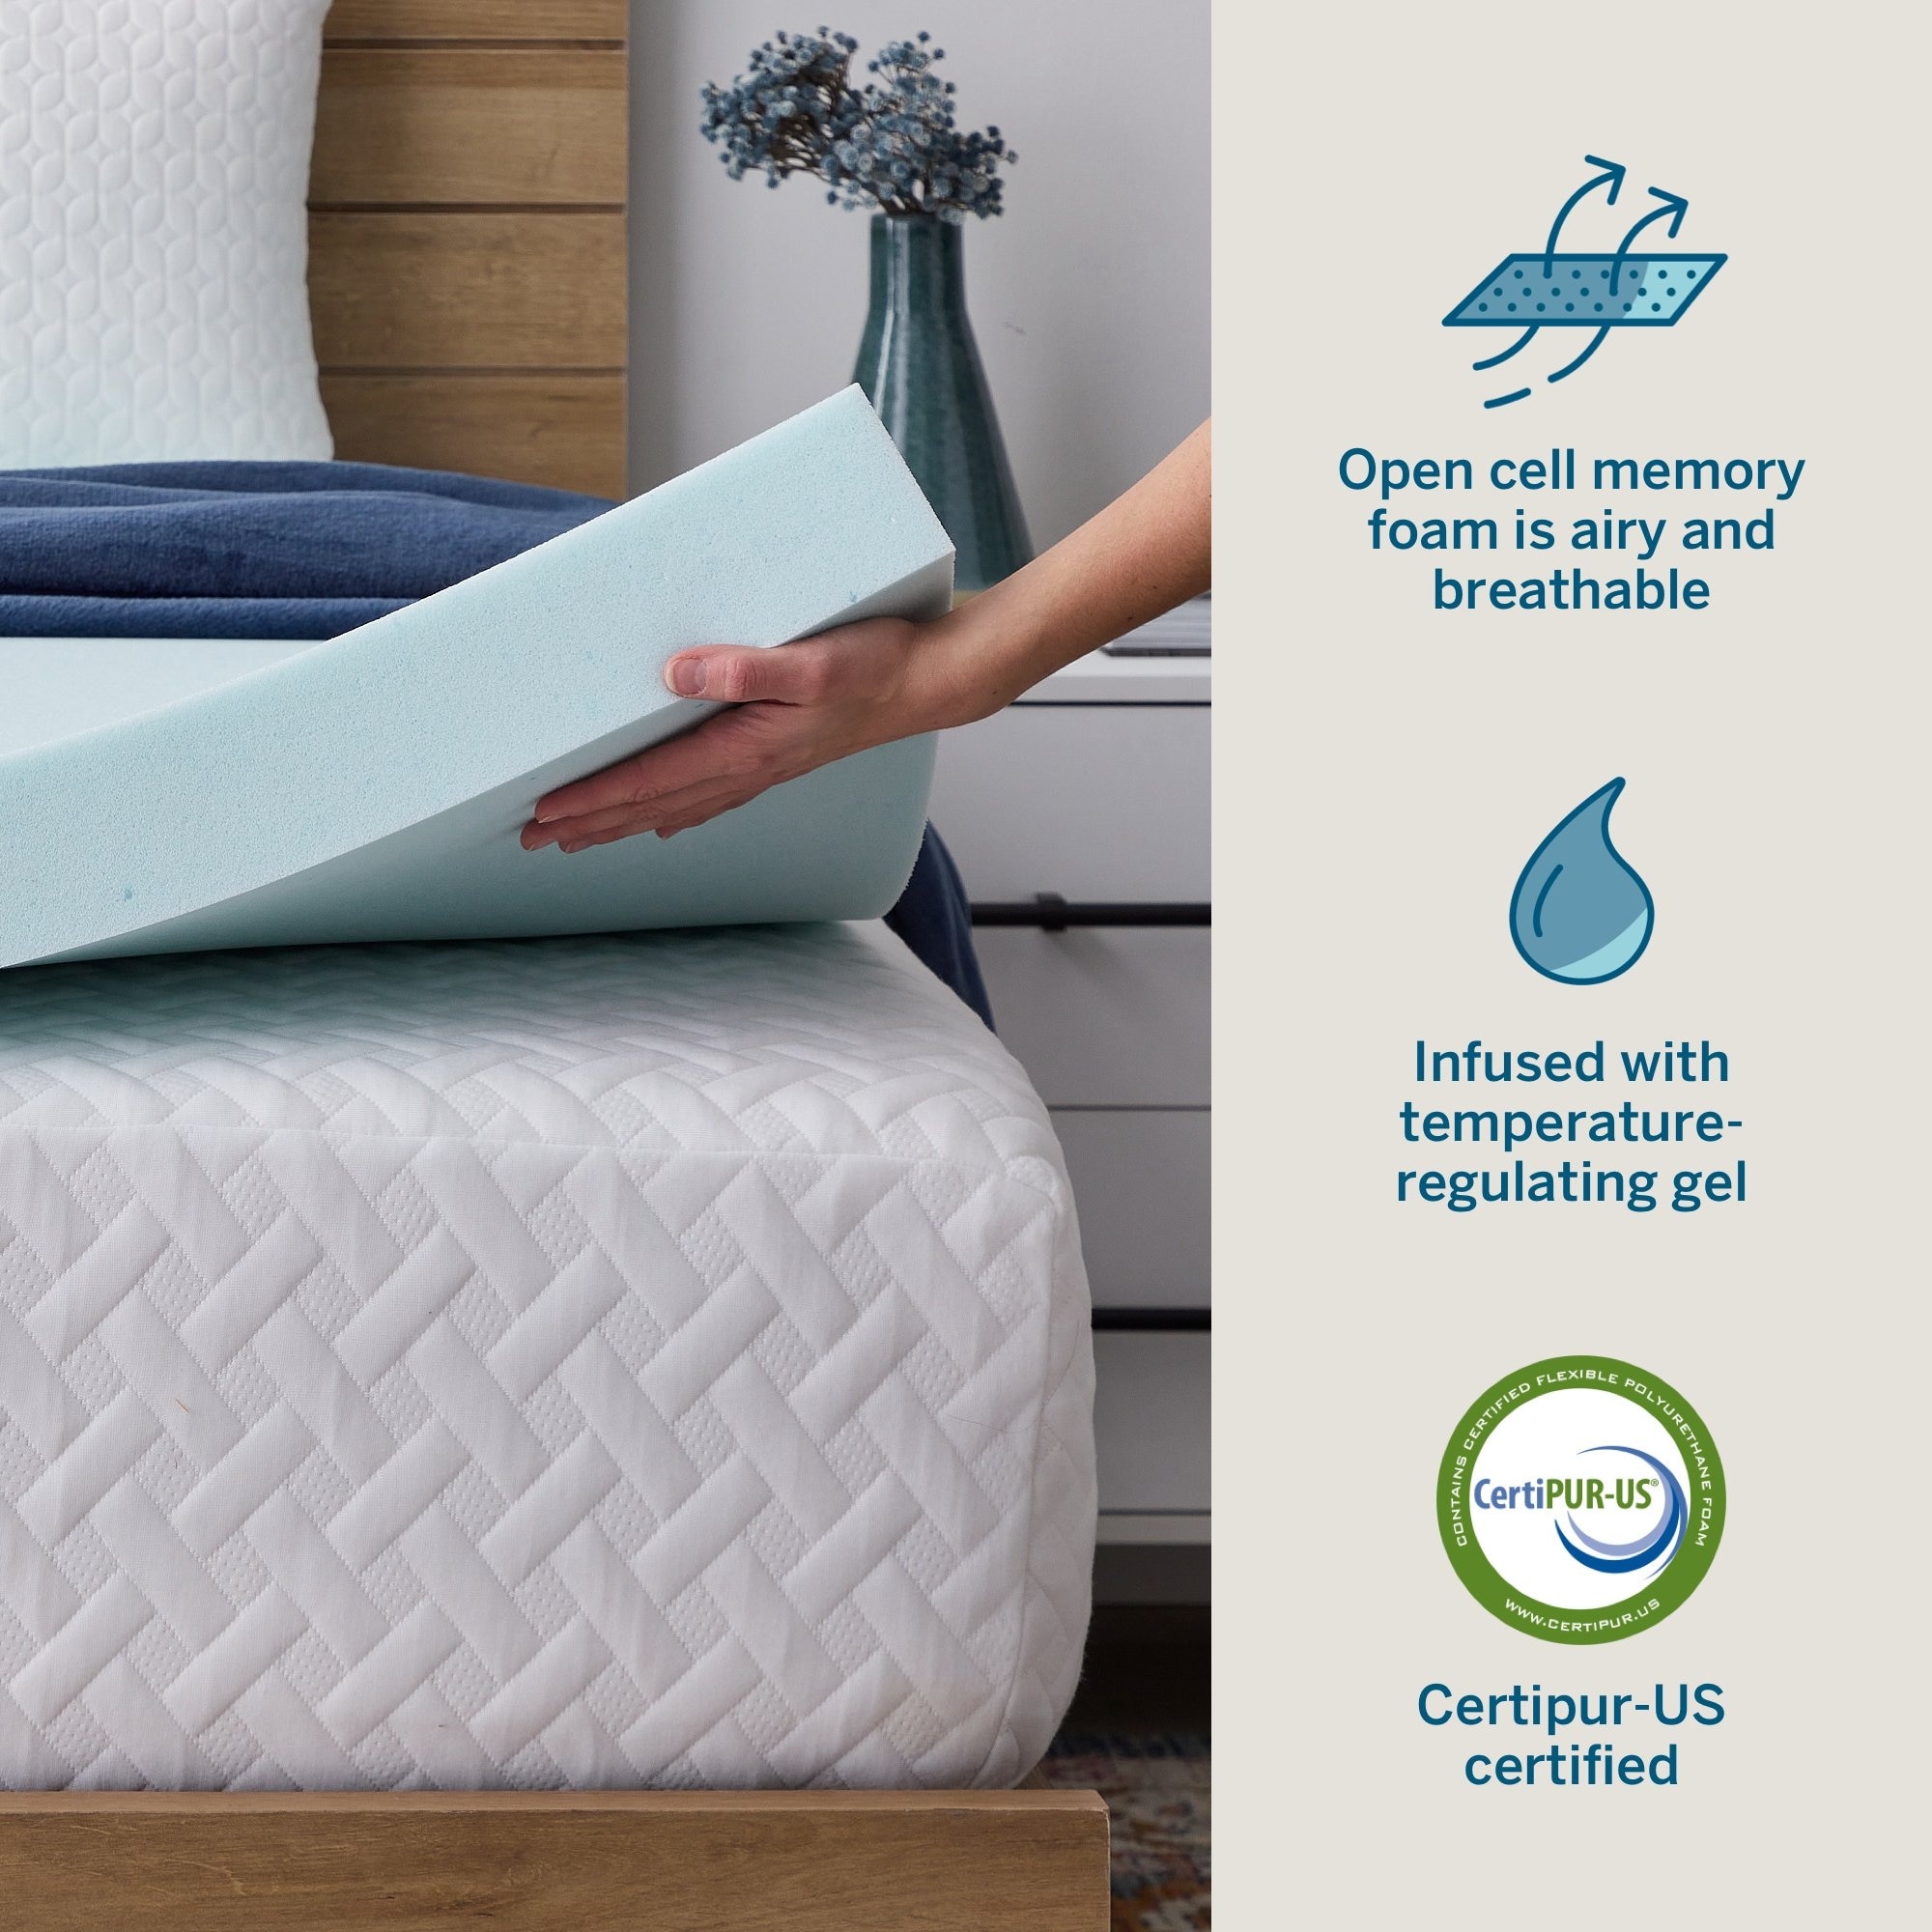 Lucid Comfort Collection 4 in. Gel and Aloe Infused Memory Foam Topper - King, Blue